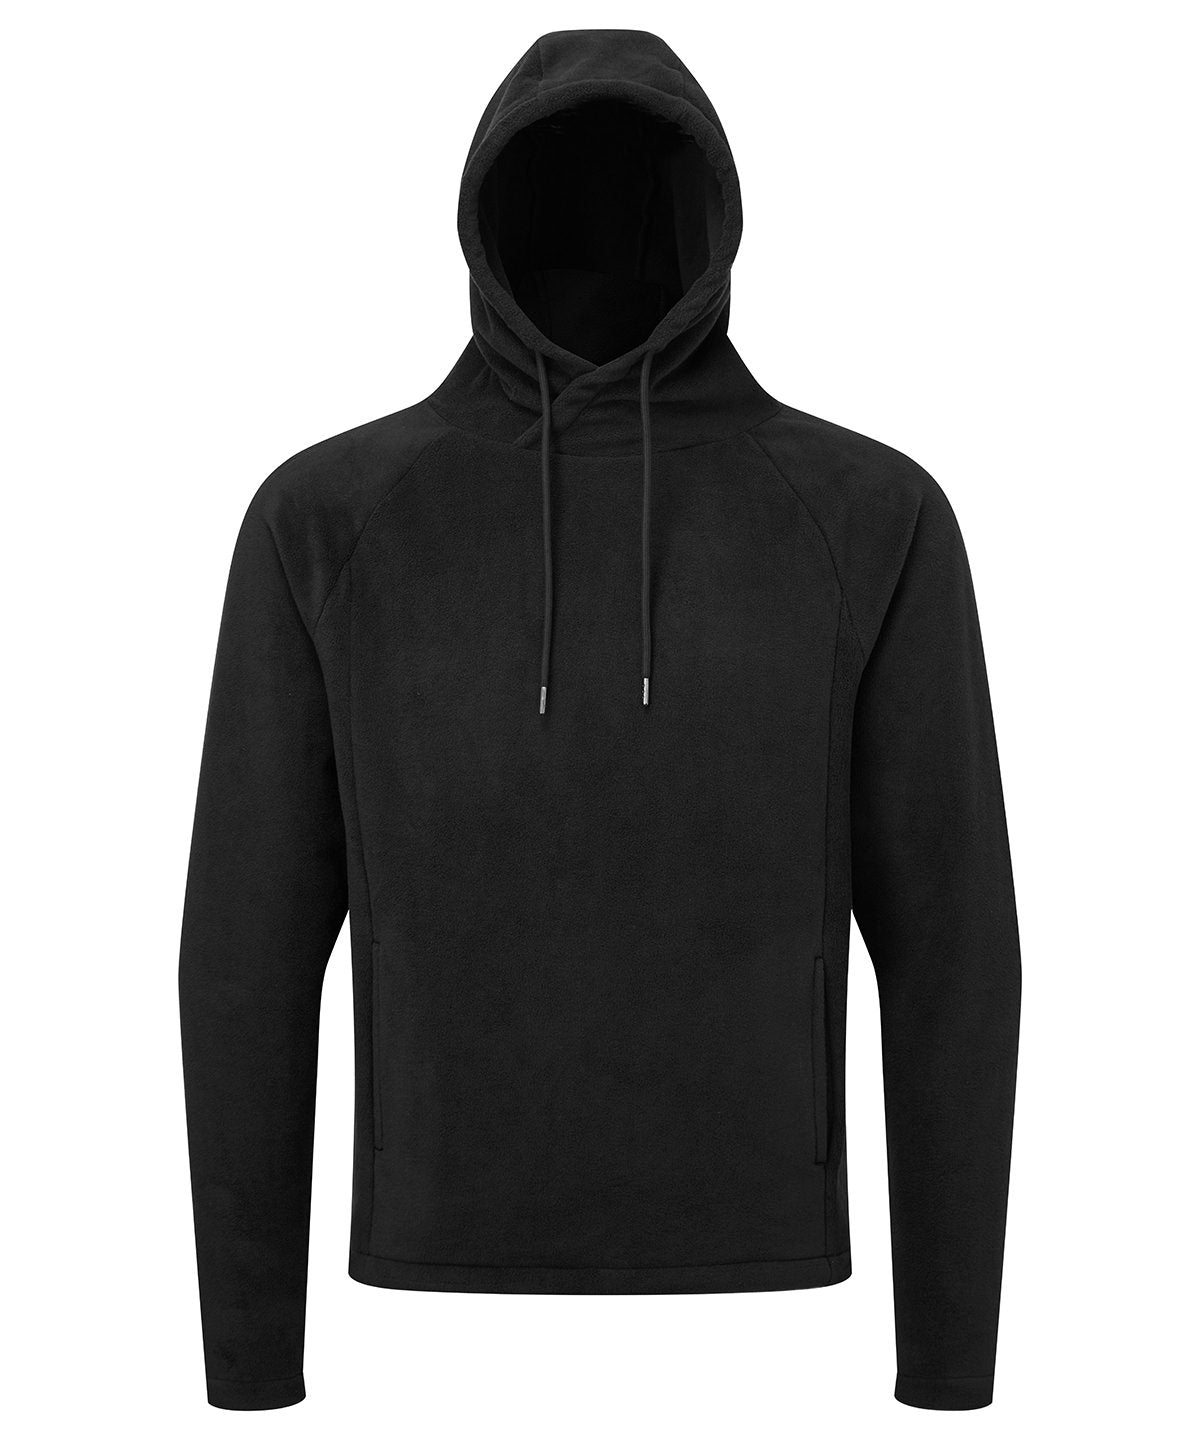 Black - Men's TriDri® microfleece hoodie Hoodies TriDri® Everyday Essentials, Exclusives, Home of the hoodie, Hoodies, Lounge Sets, New For 2021, New In Autumn Winter, New In Mid Year, Working From Home Schoolwear Centres